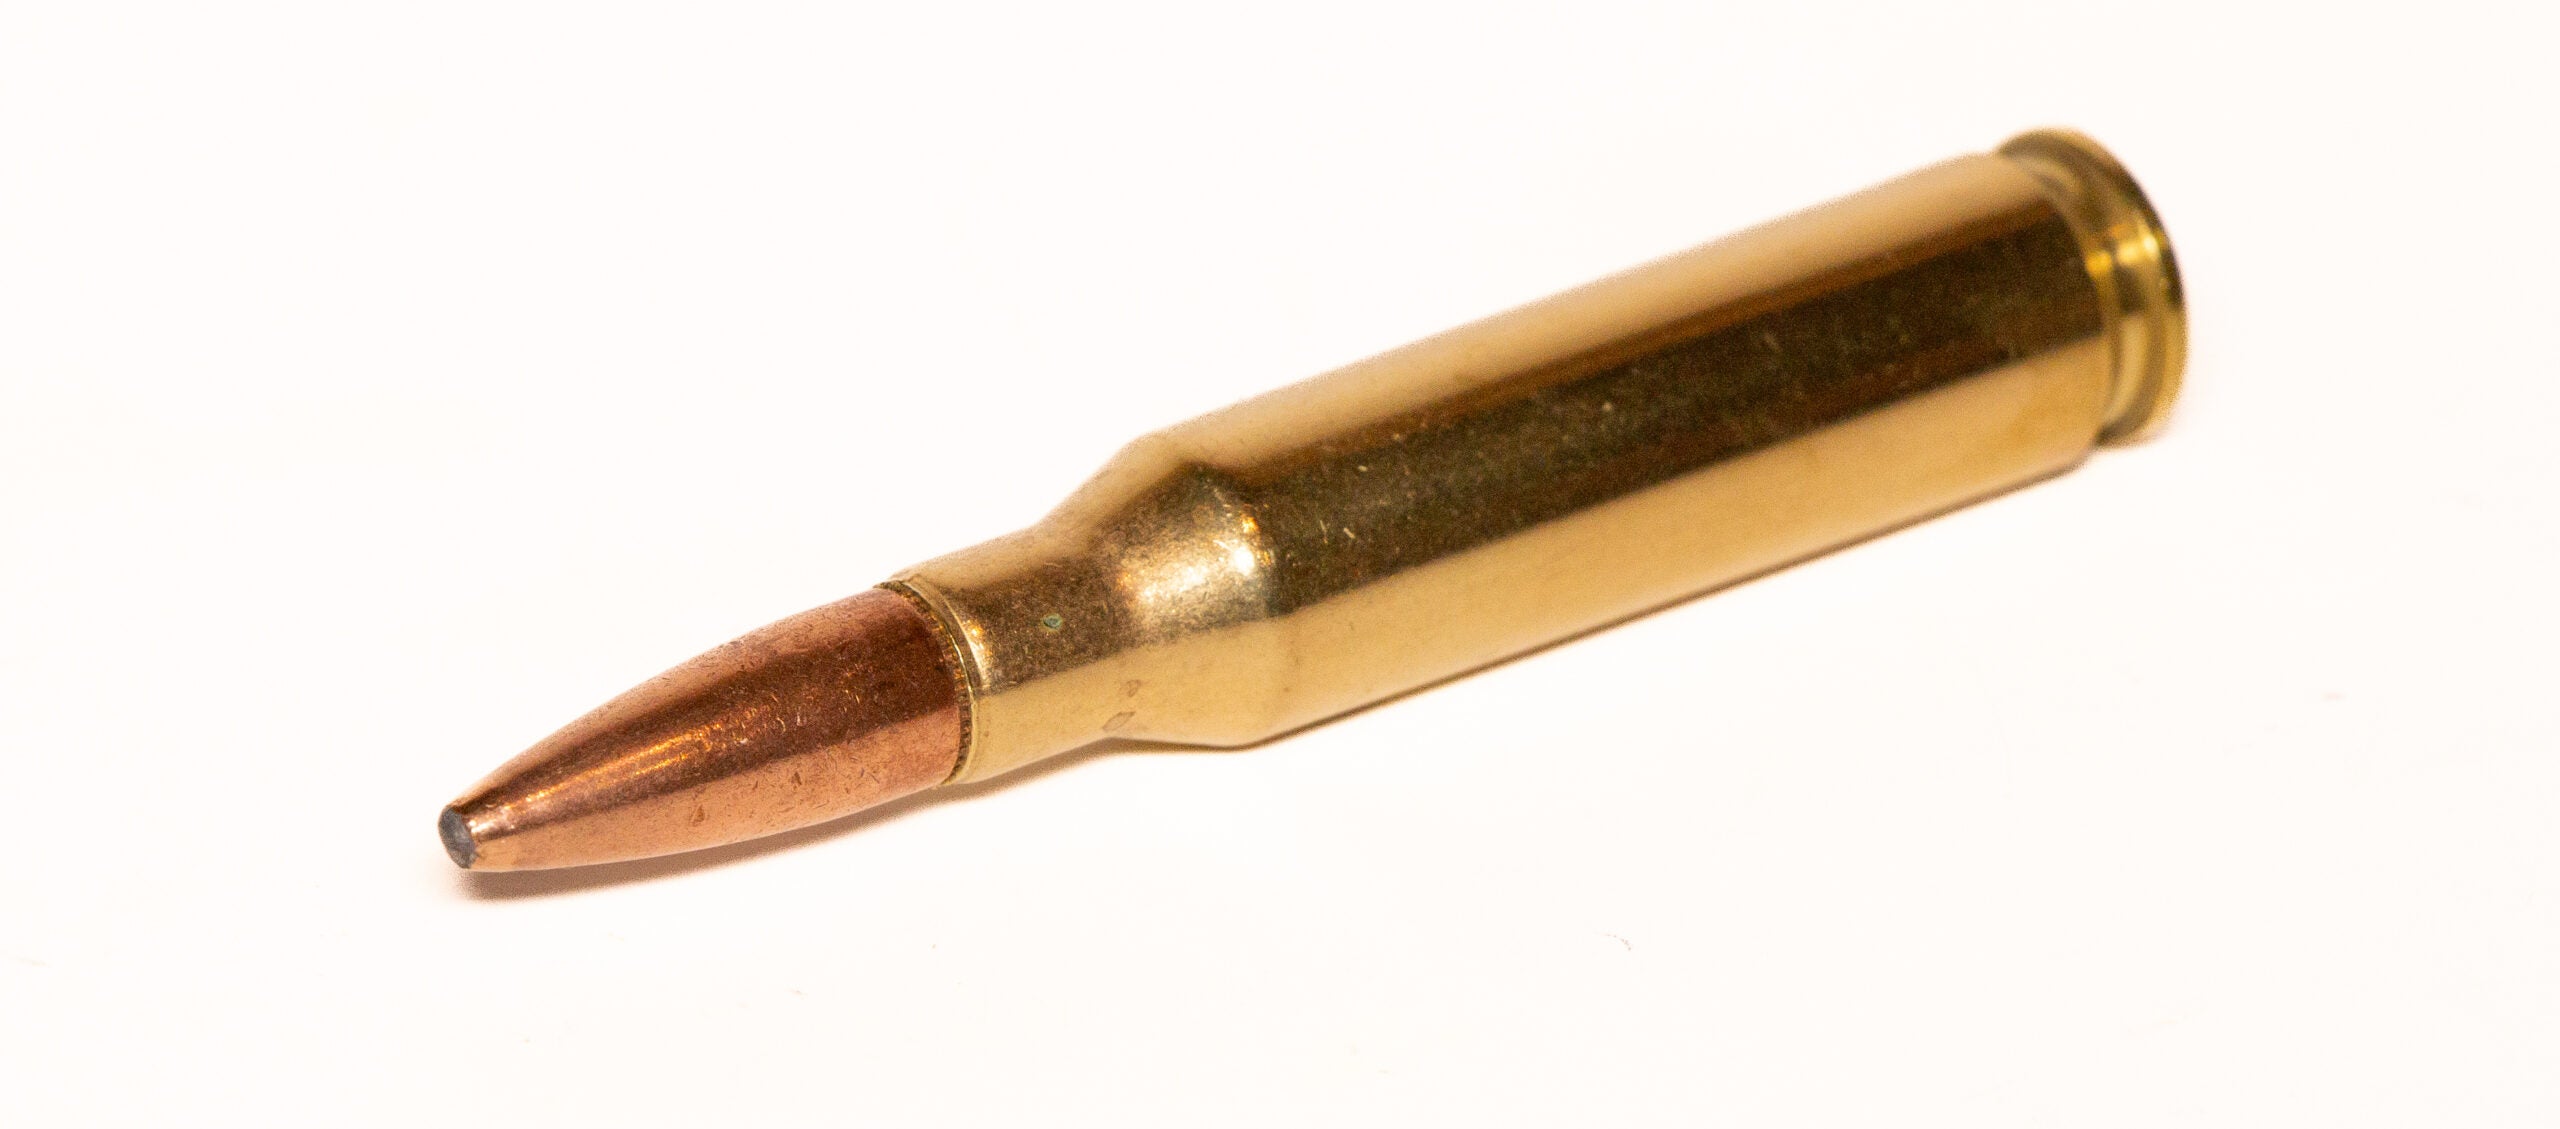 A 7mm-08 Remington cartridge on a white background